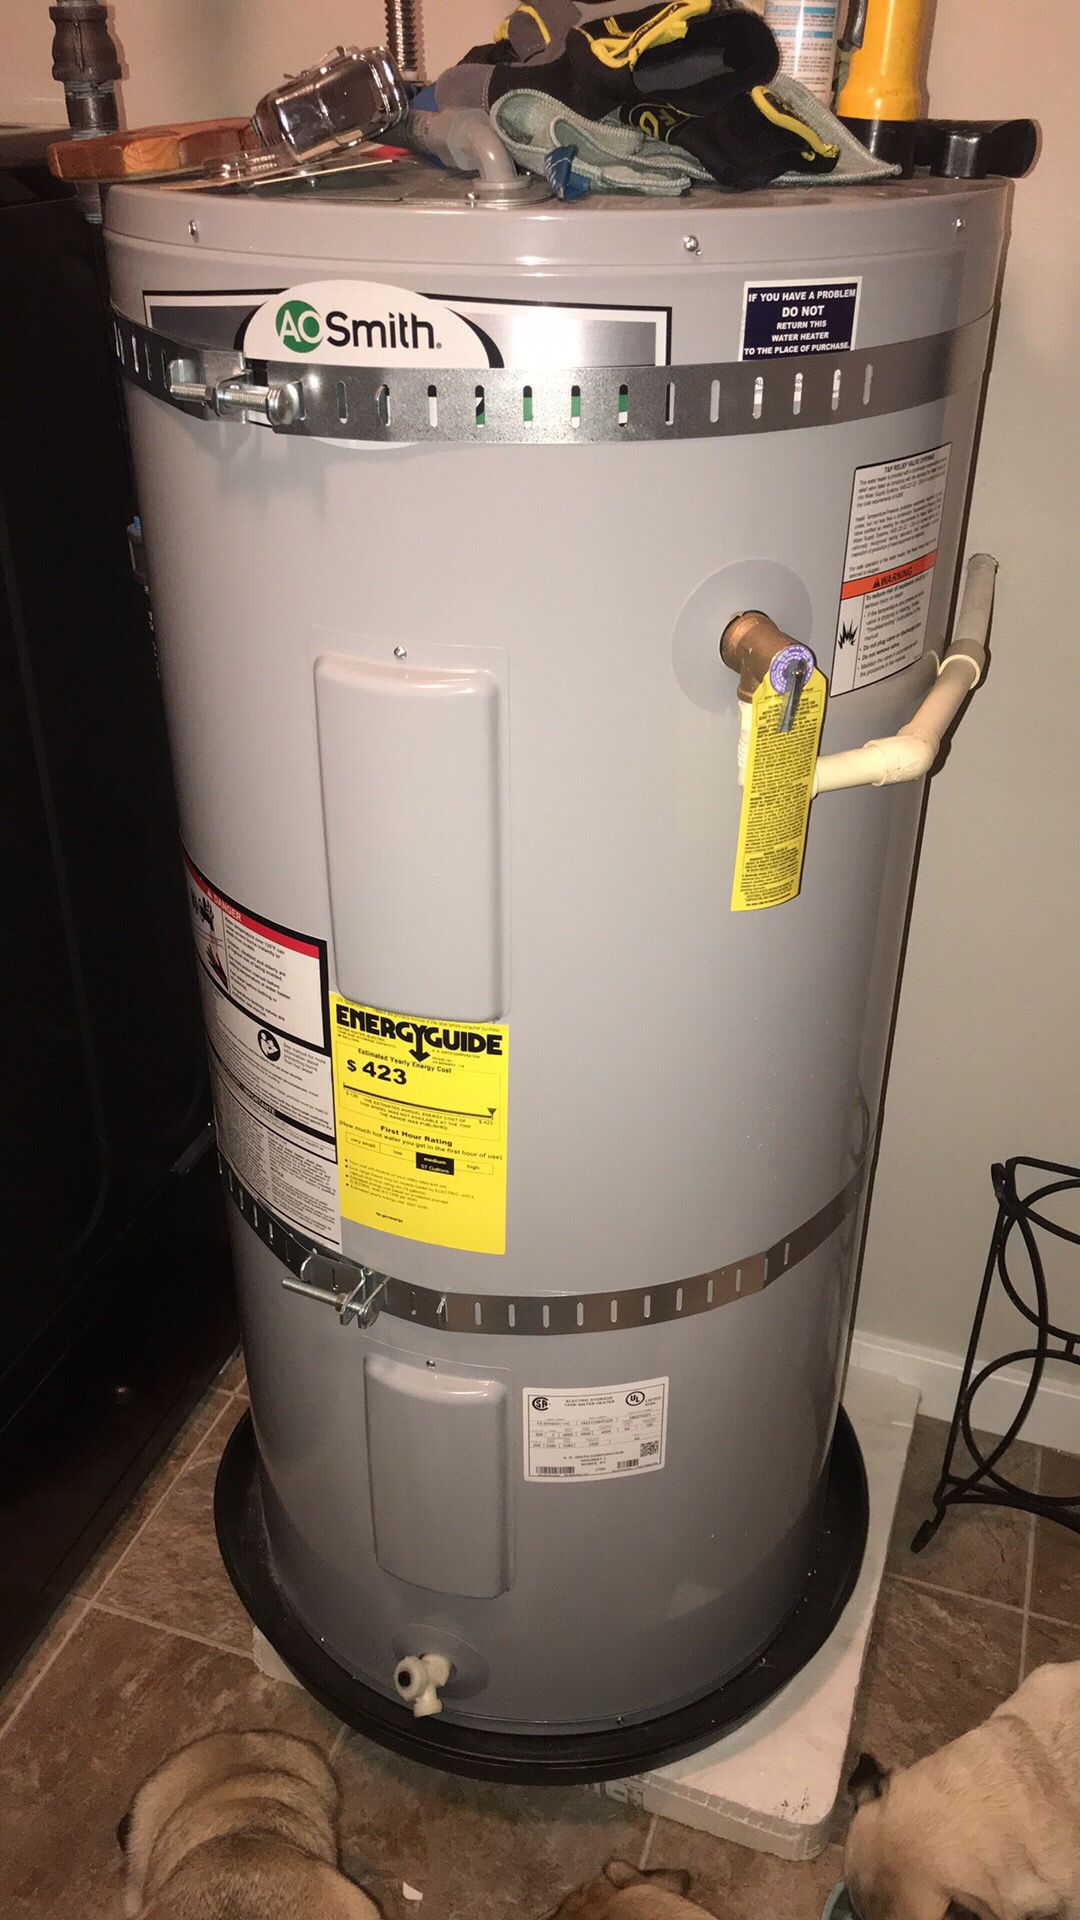 A.O. Smith Signature 50-Gallon Short 6-year Limited 4500-Watt Double Element Electric Water Heater Item # 816161 Model # E6-50R45DV